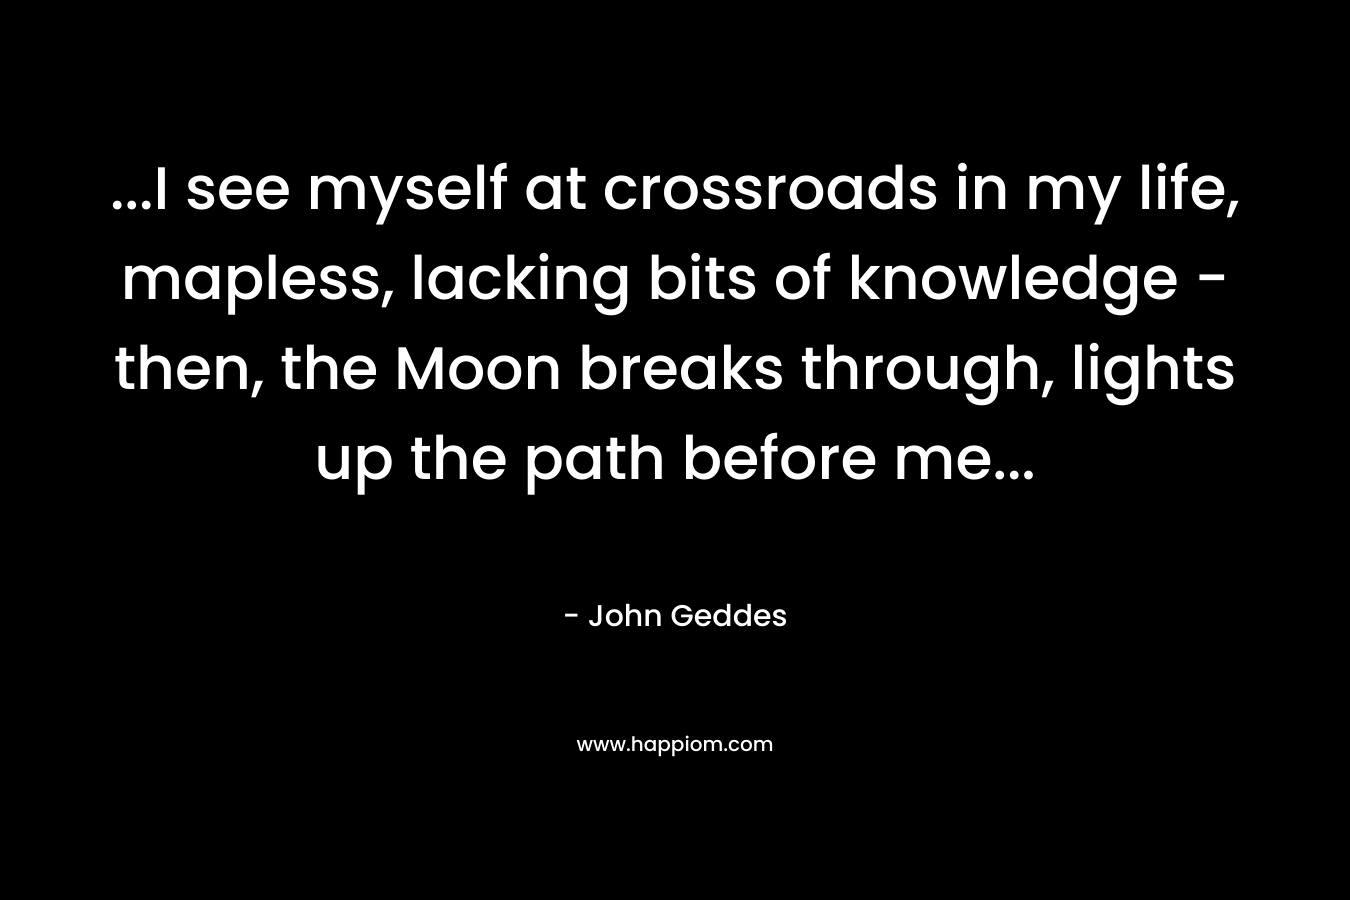 …I see myself at crossroads in my life, mapless, lacking bits of knowledge – then, the Moon breaks through, lights up the path before me… – John Geddes